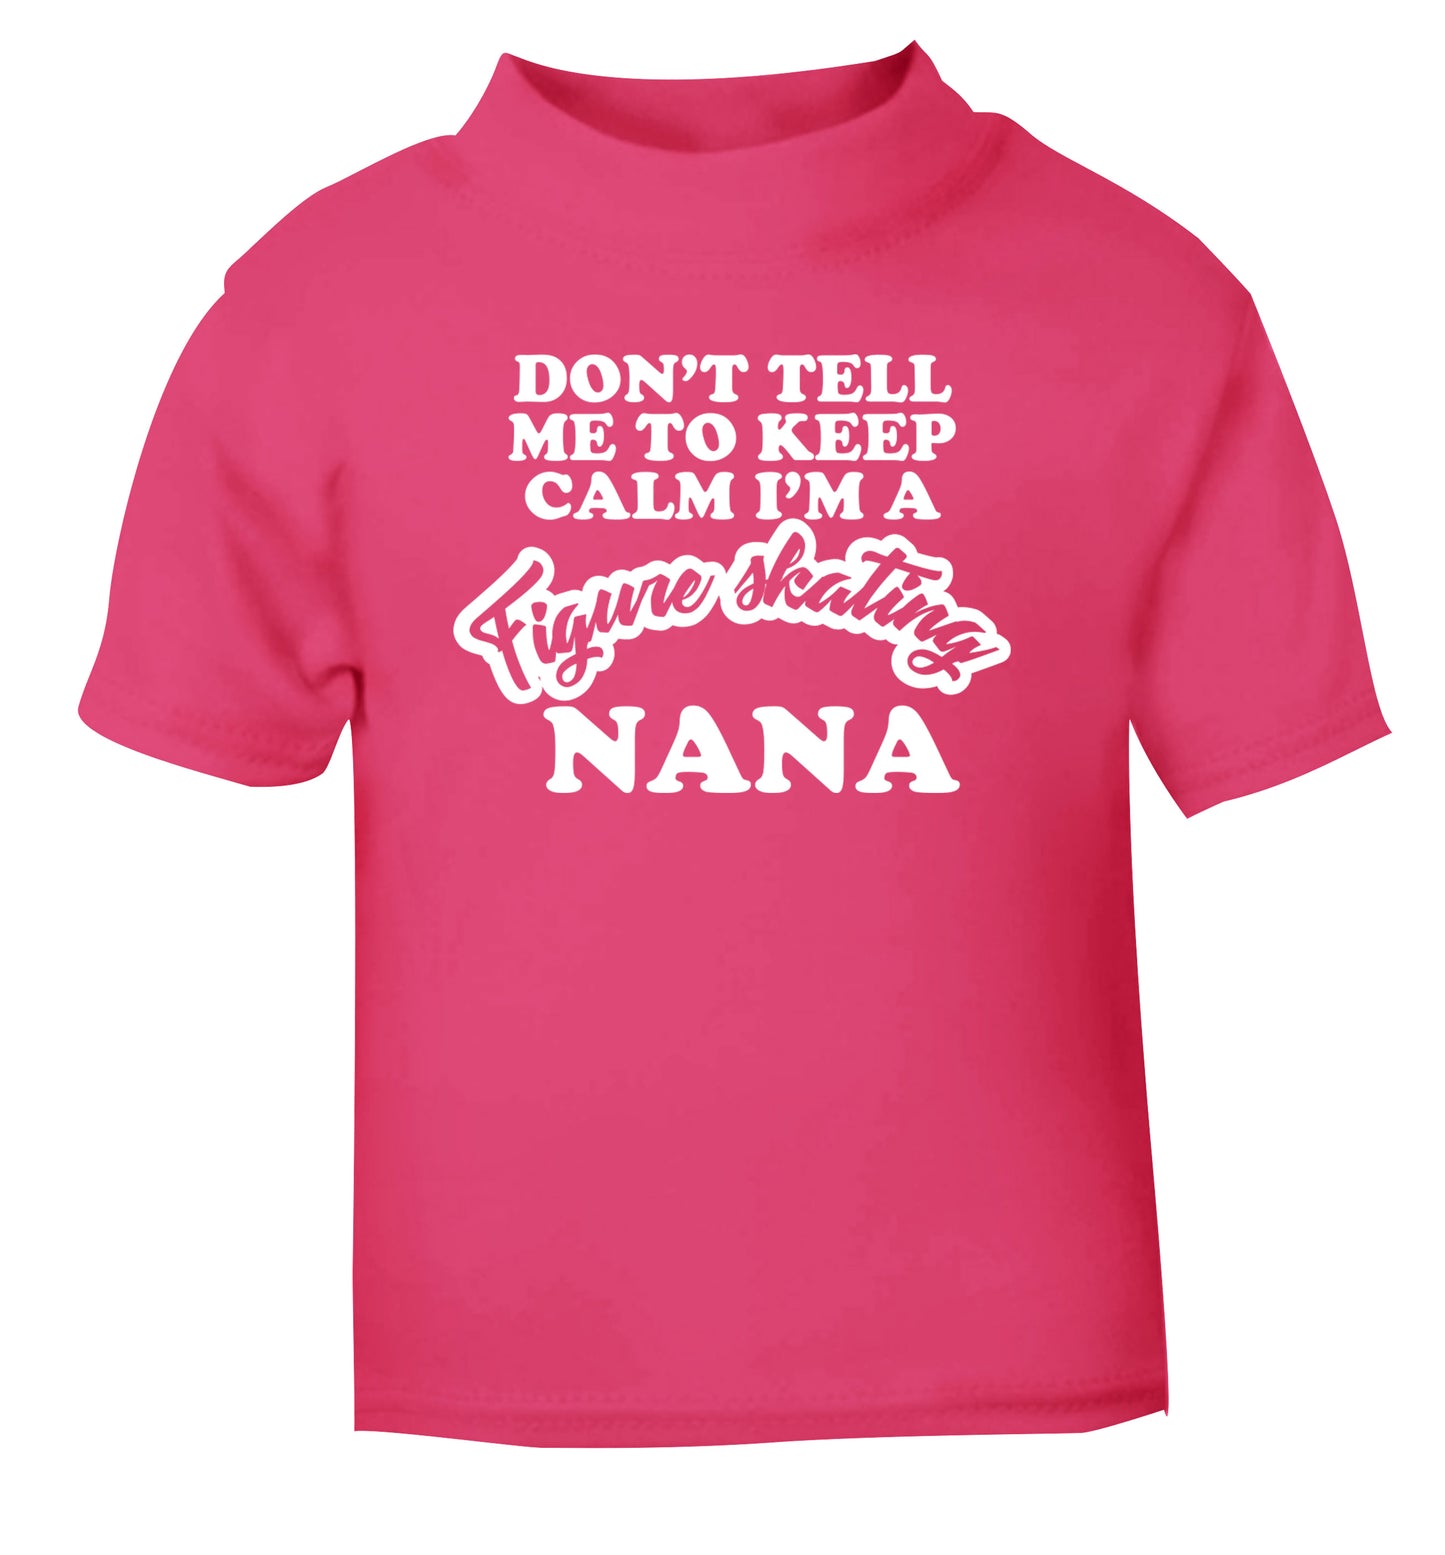 Don't tell me to keep calm I'm a figure skating nana pink Baby Toddler Tshirt 2 Years